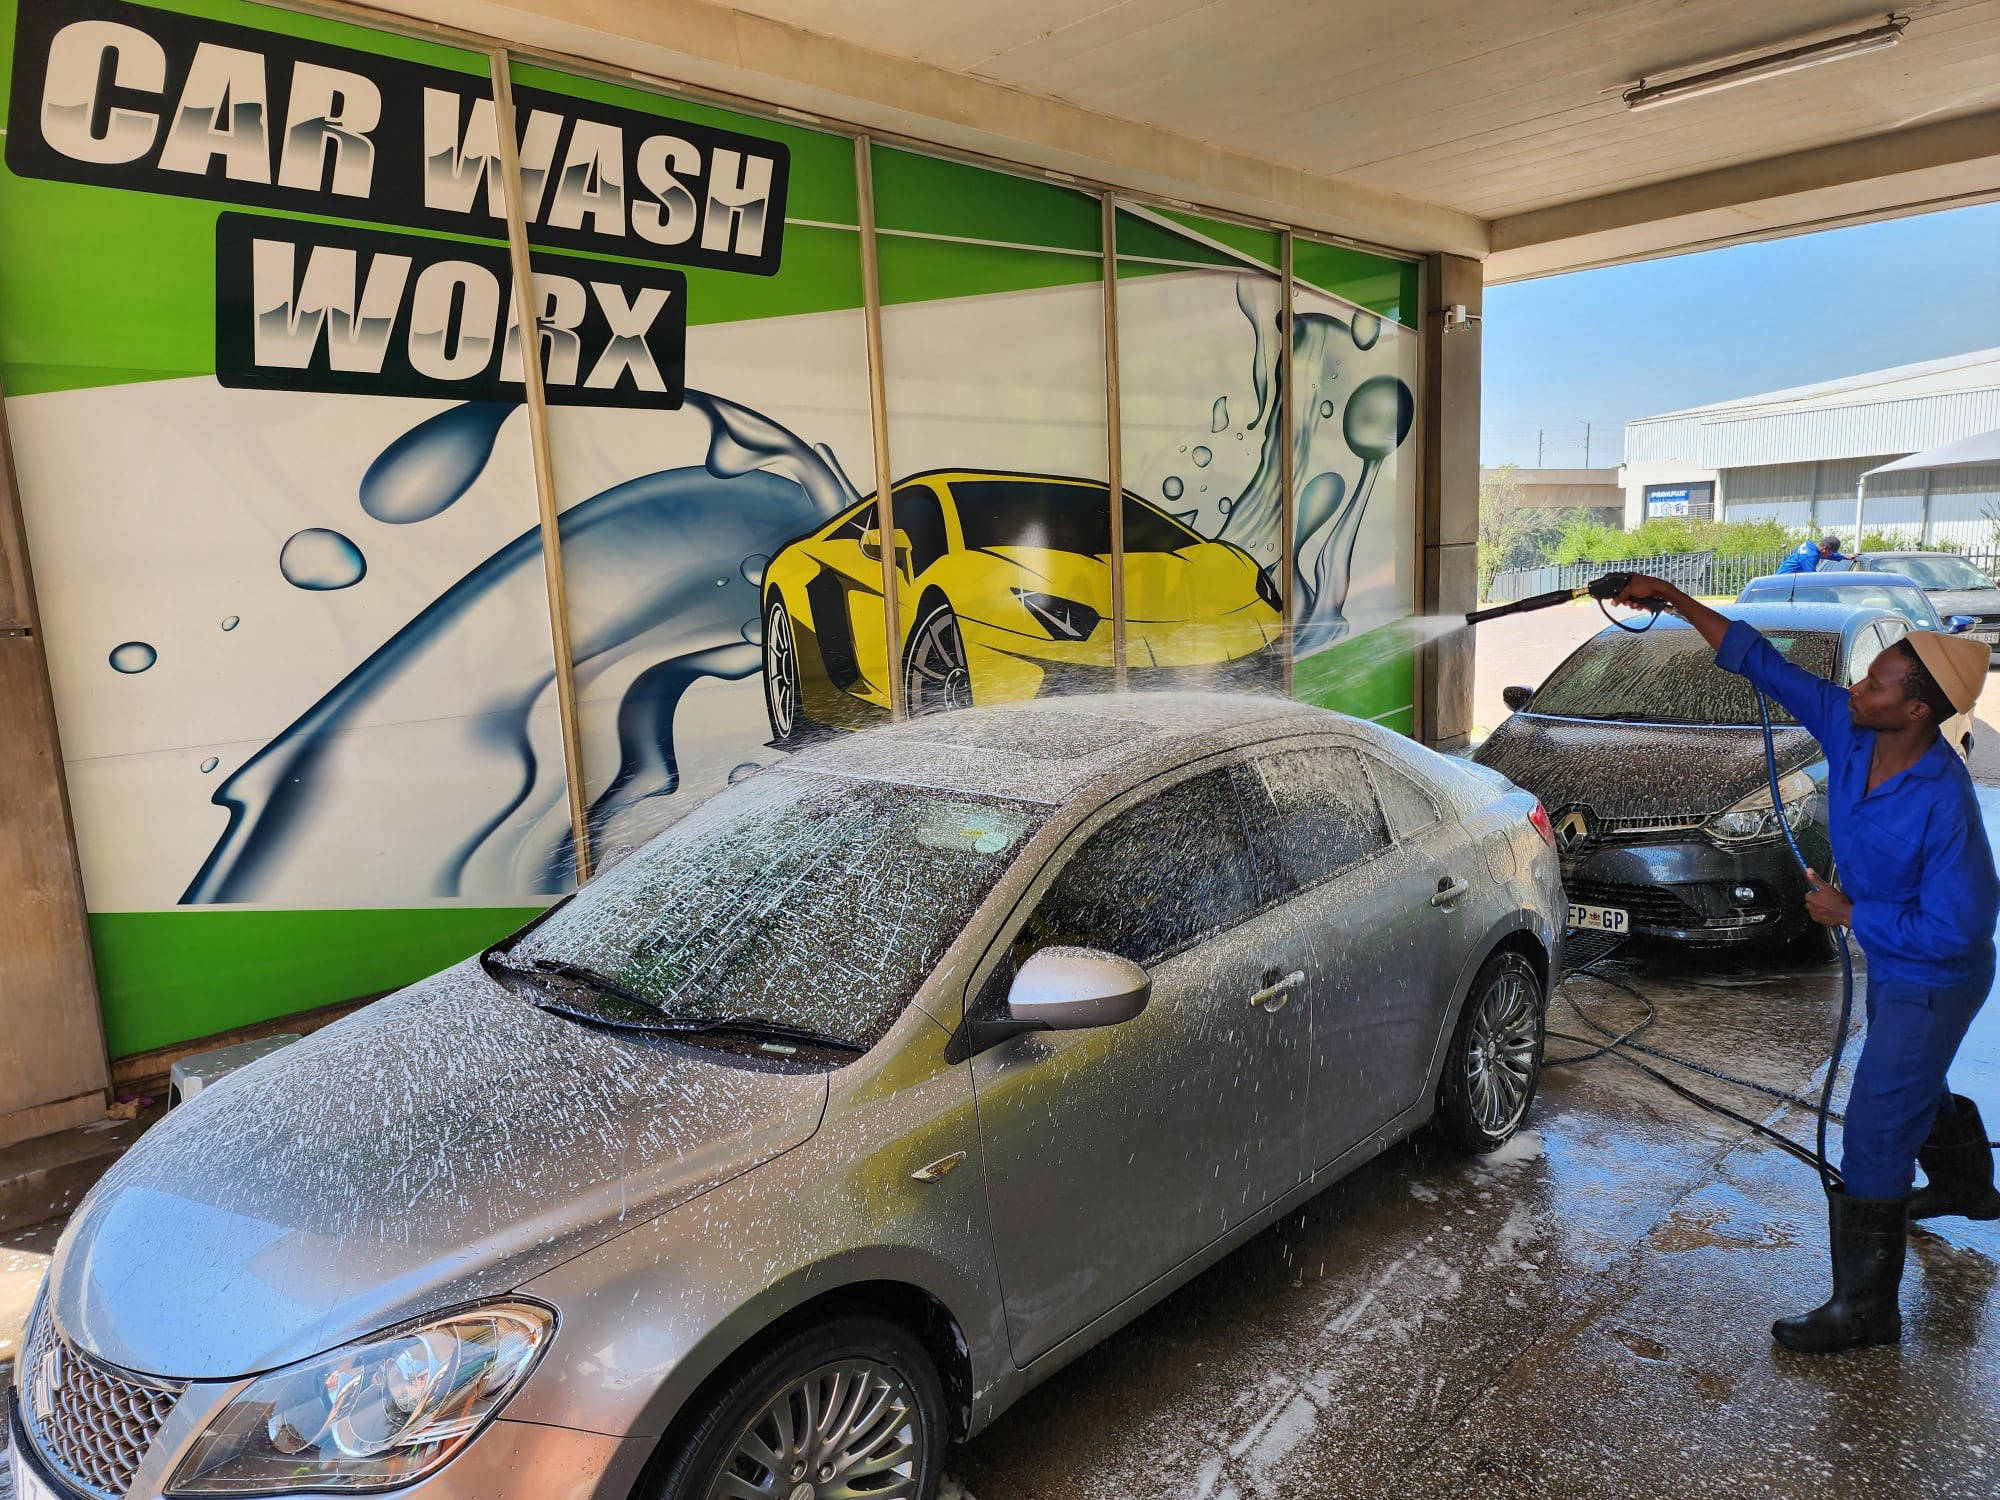 Caltex Midrand CarWash Worx Branch, Car Wash Franchises Available, CarWash Worx Head Office, Join The Leading Car Wash Franchising Group, Start Your Own Successful Car Wash Business Now